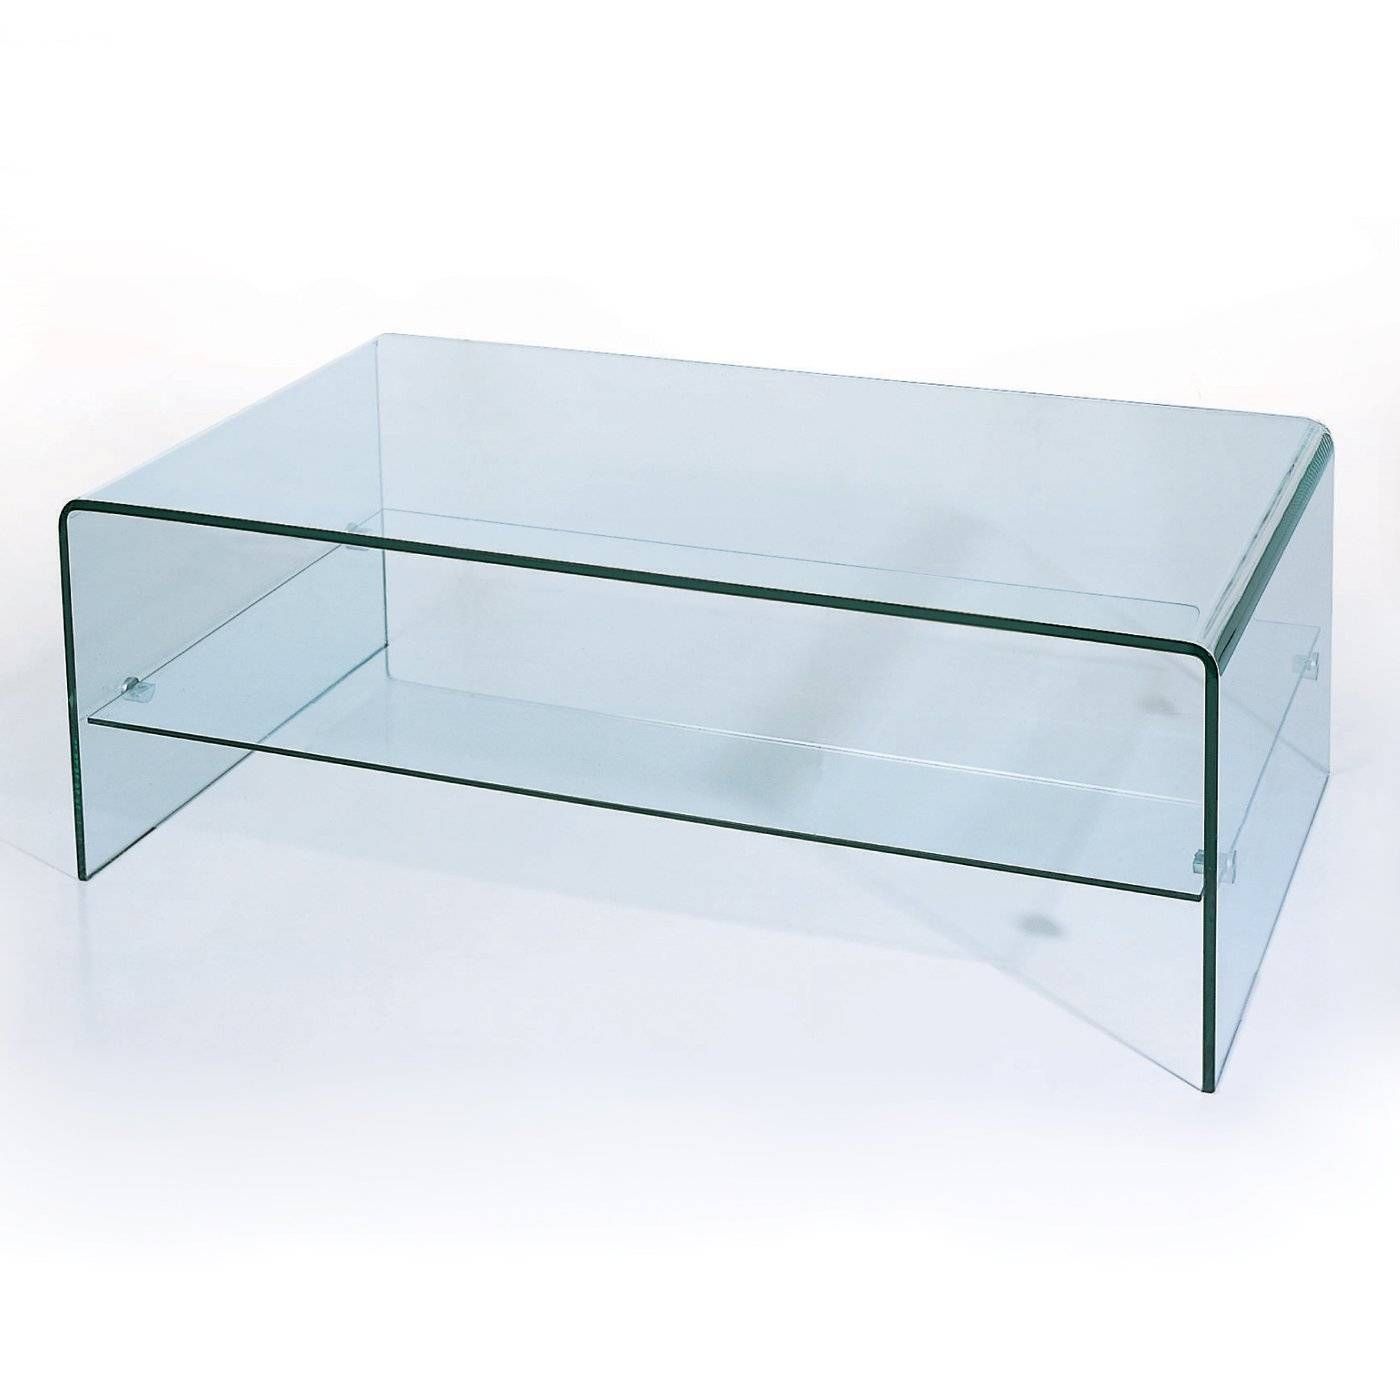 Clear Glass Waterfall Coffee Table | Courtagerivegauche Throughout Transparent Glass Coffee Tables (View 16 of 30)